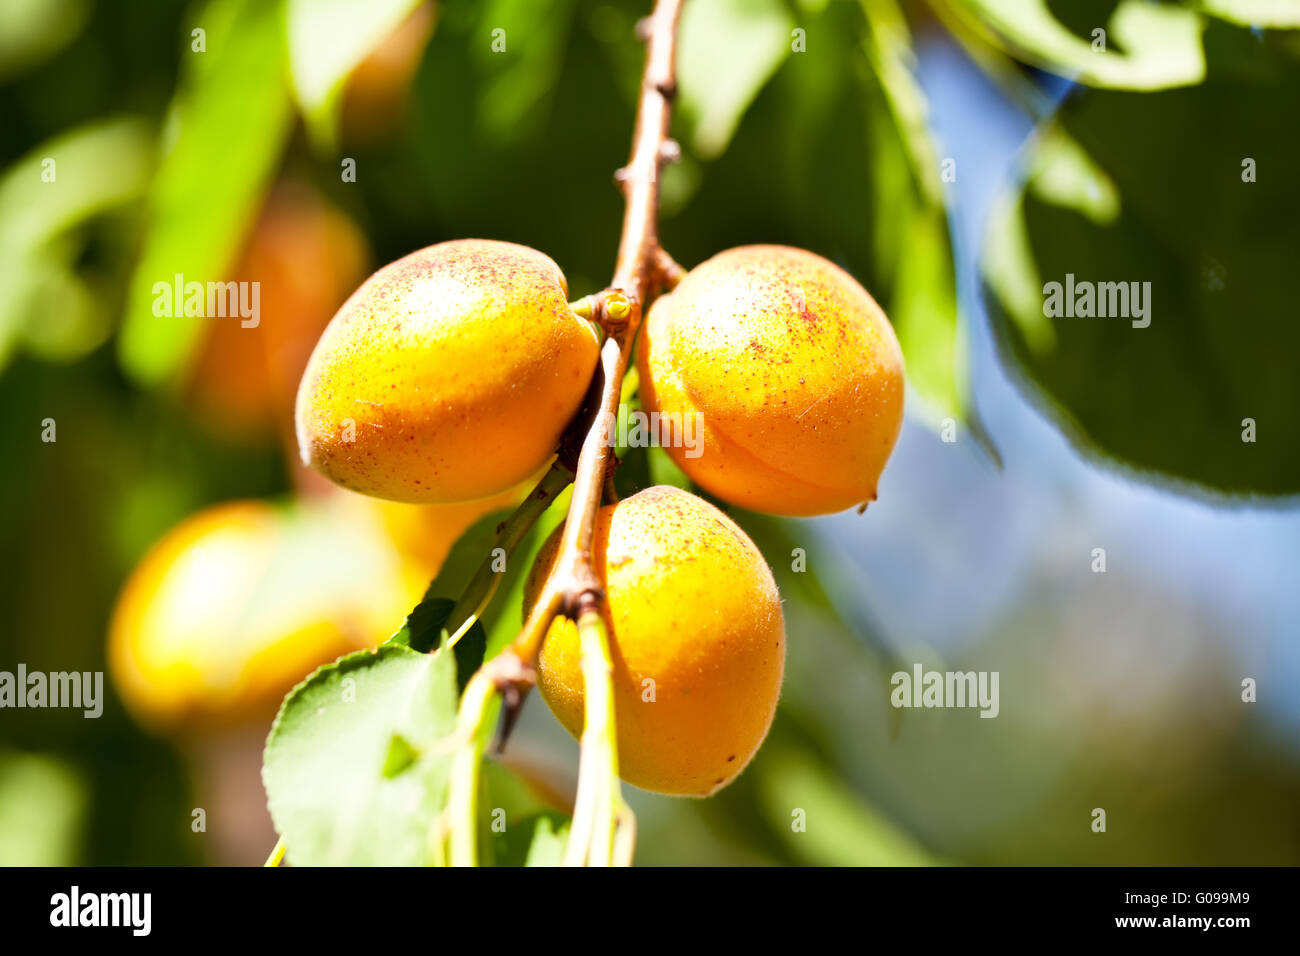 Three apricots on a branch among green leaves in summer Stock Photo